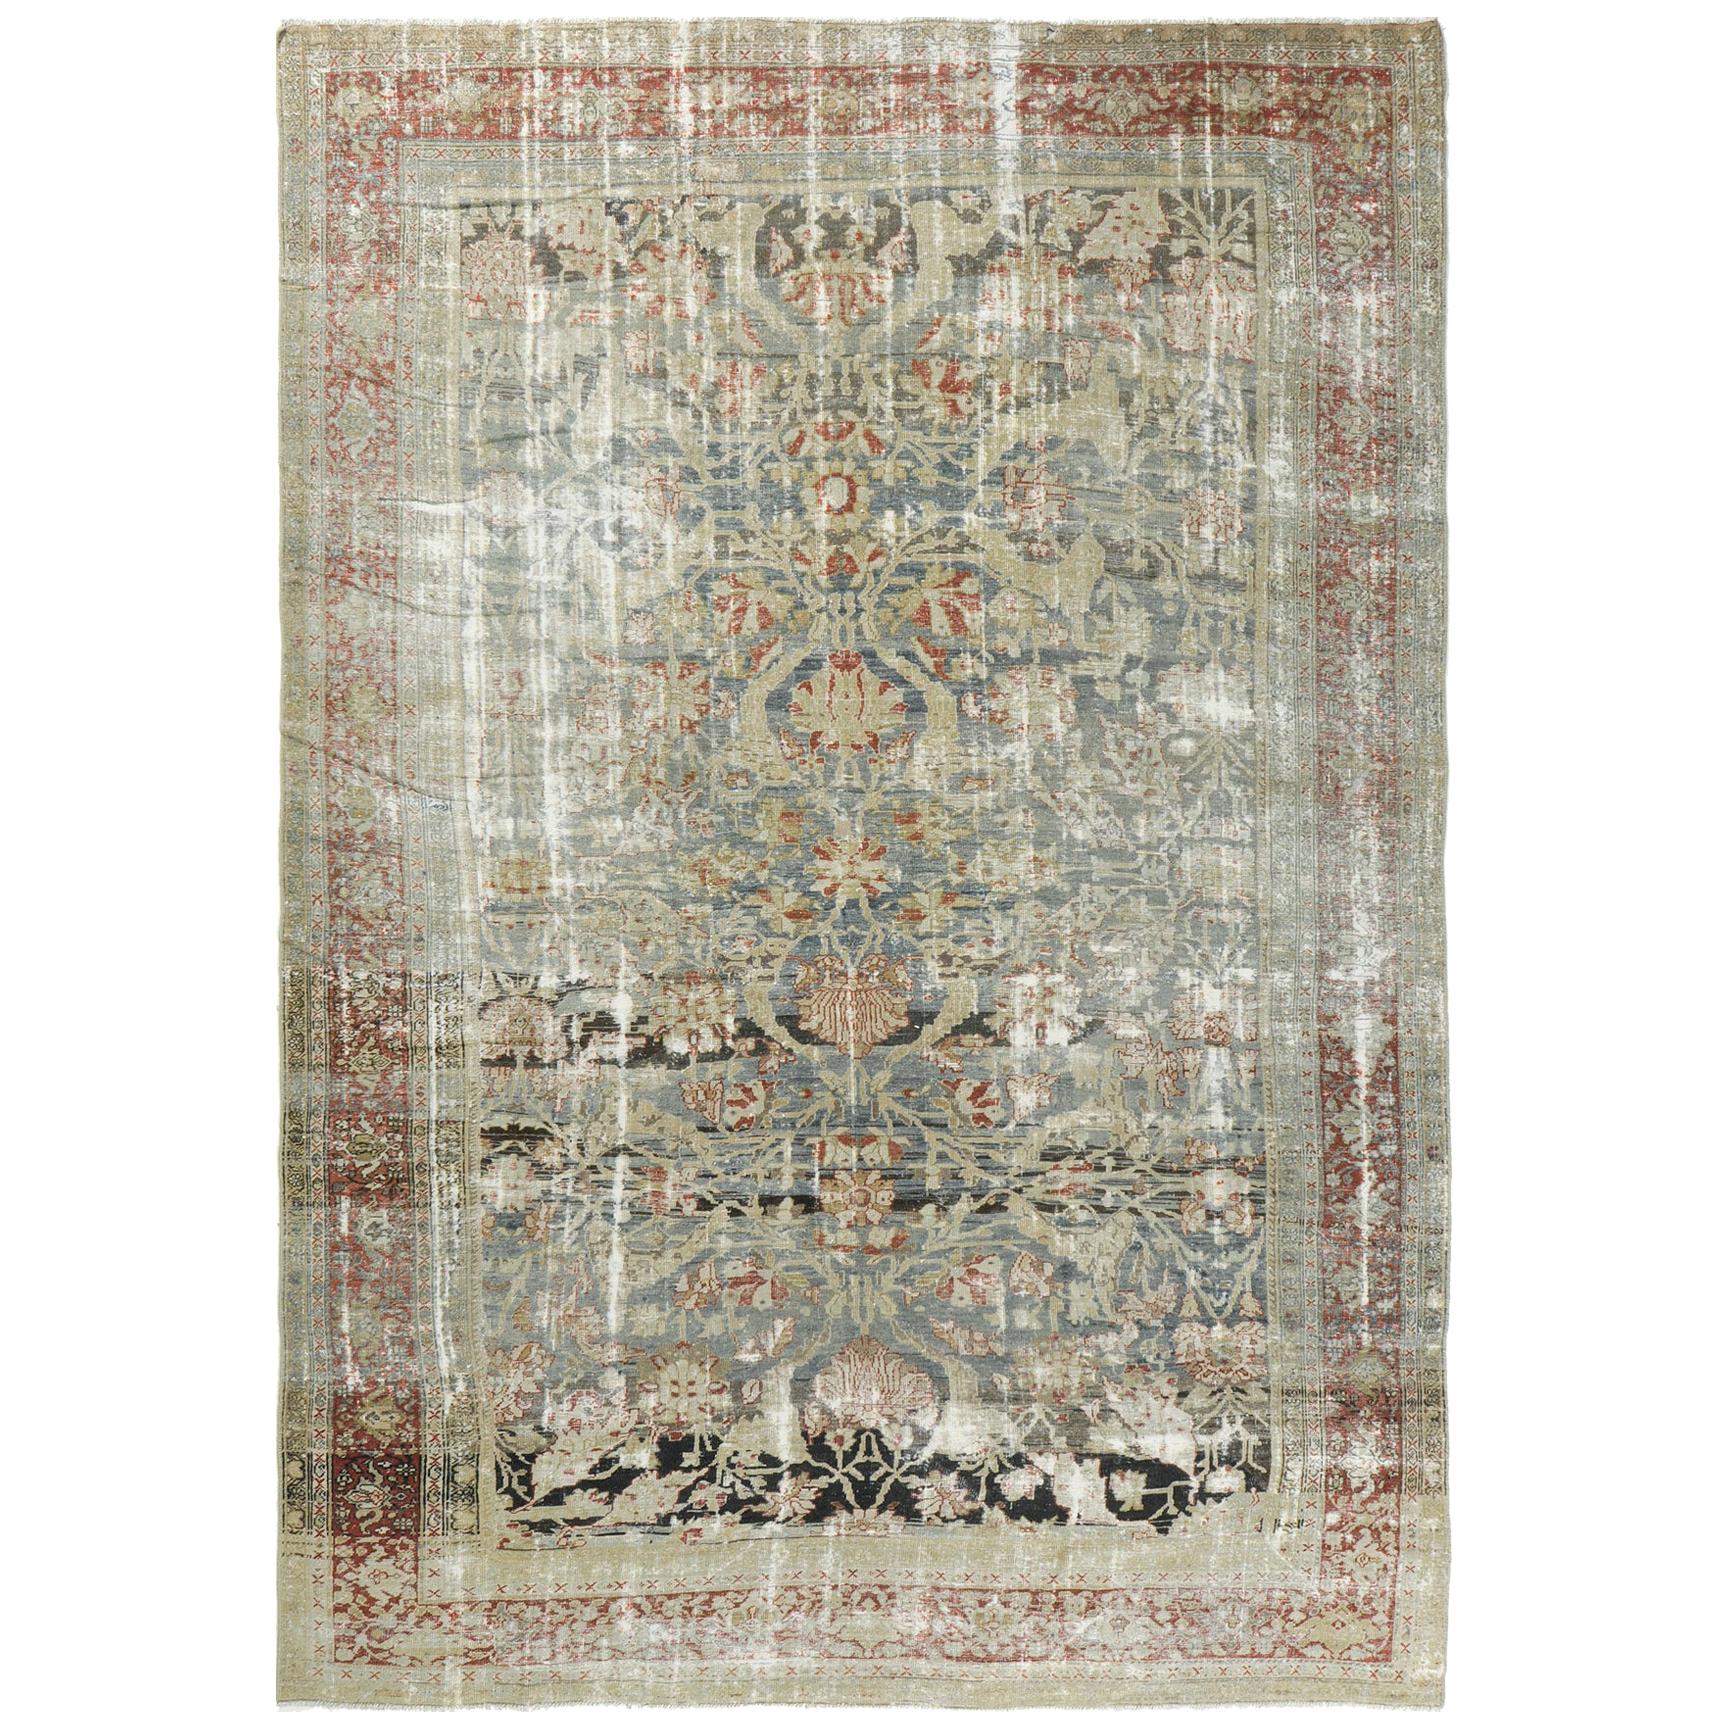 Antique Persian Sultanabad Distressed Rug